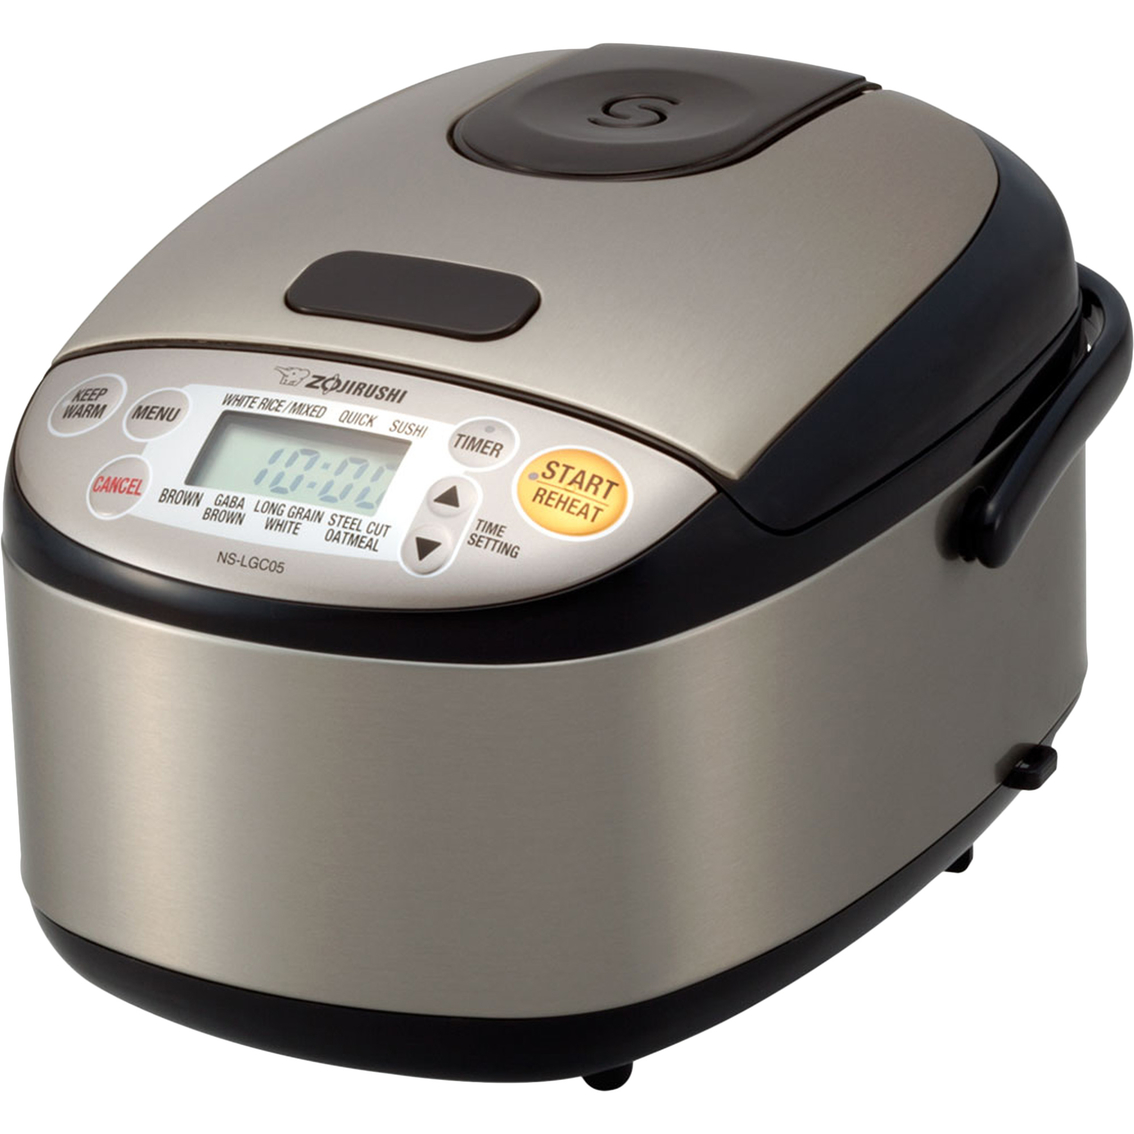 military only: Zojirushi 3 cup Micom Rice Cooker and Warmer - $84.95 (no tax) - AAFES/ShopMyExchange